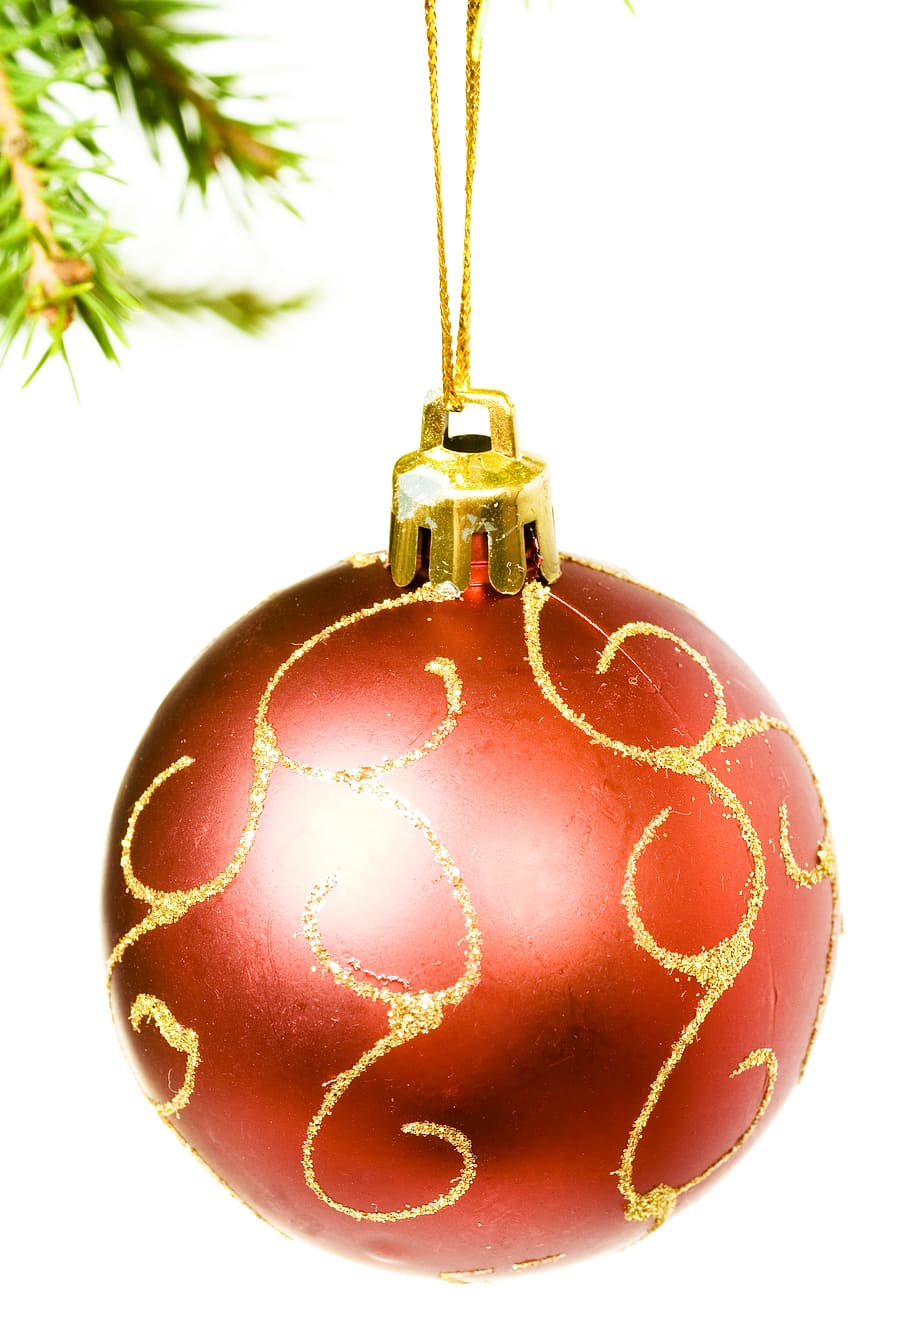 ball, branch, tree, ornament, red, green, pine, spruce, white, new